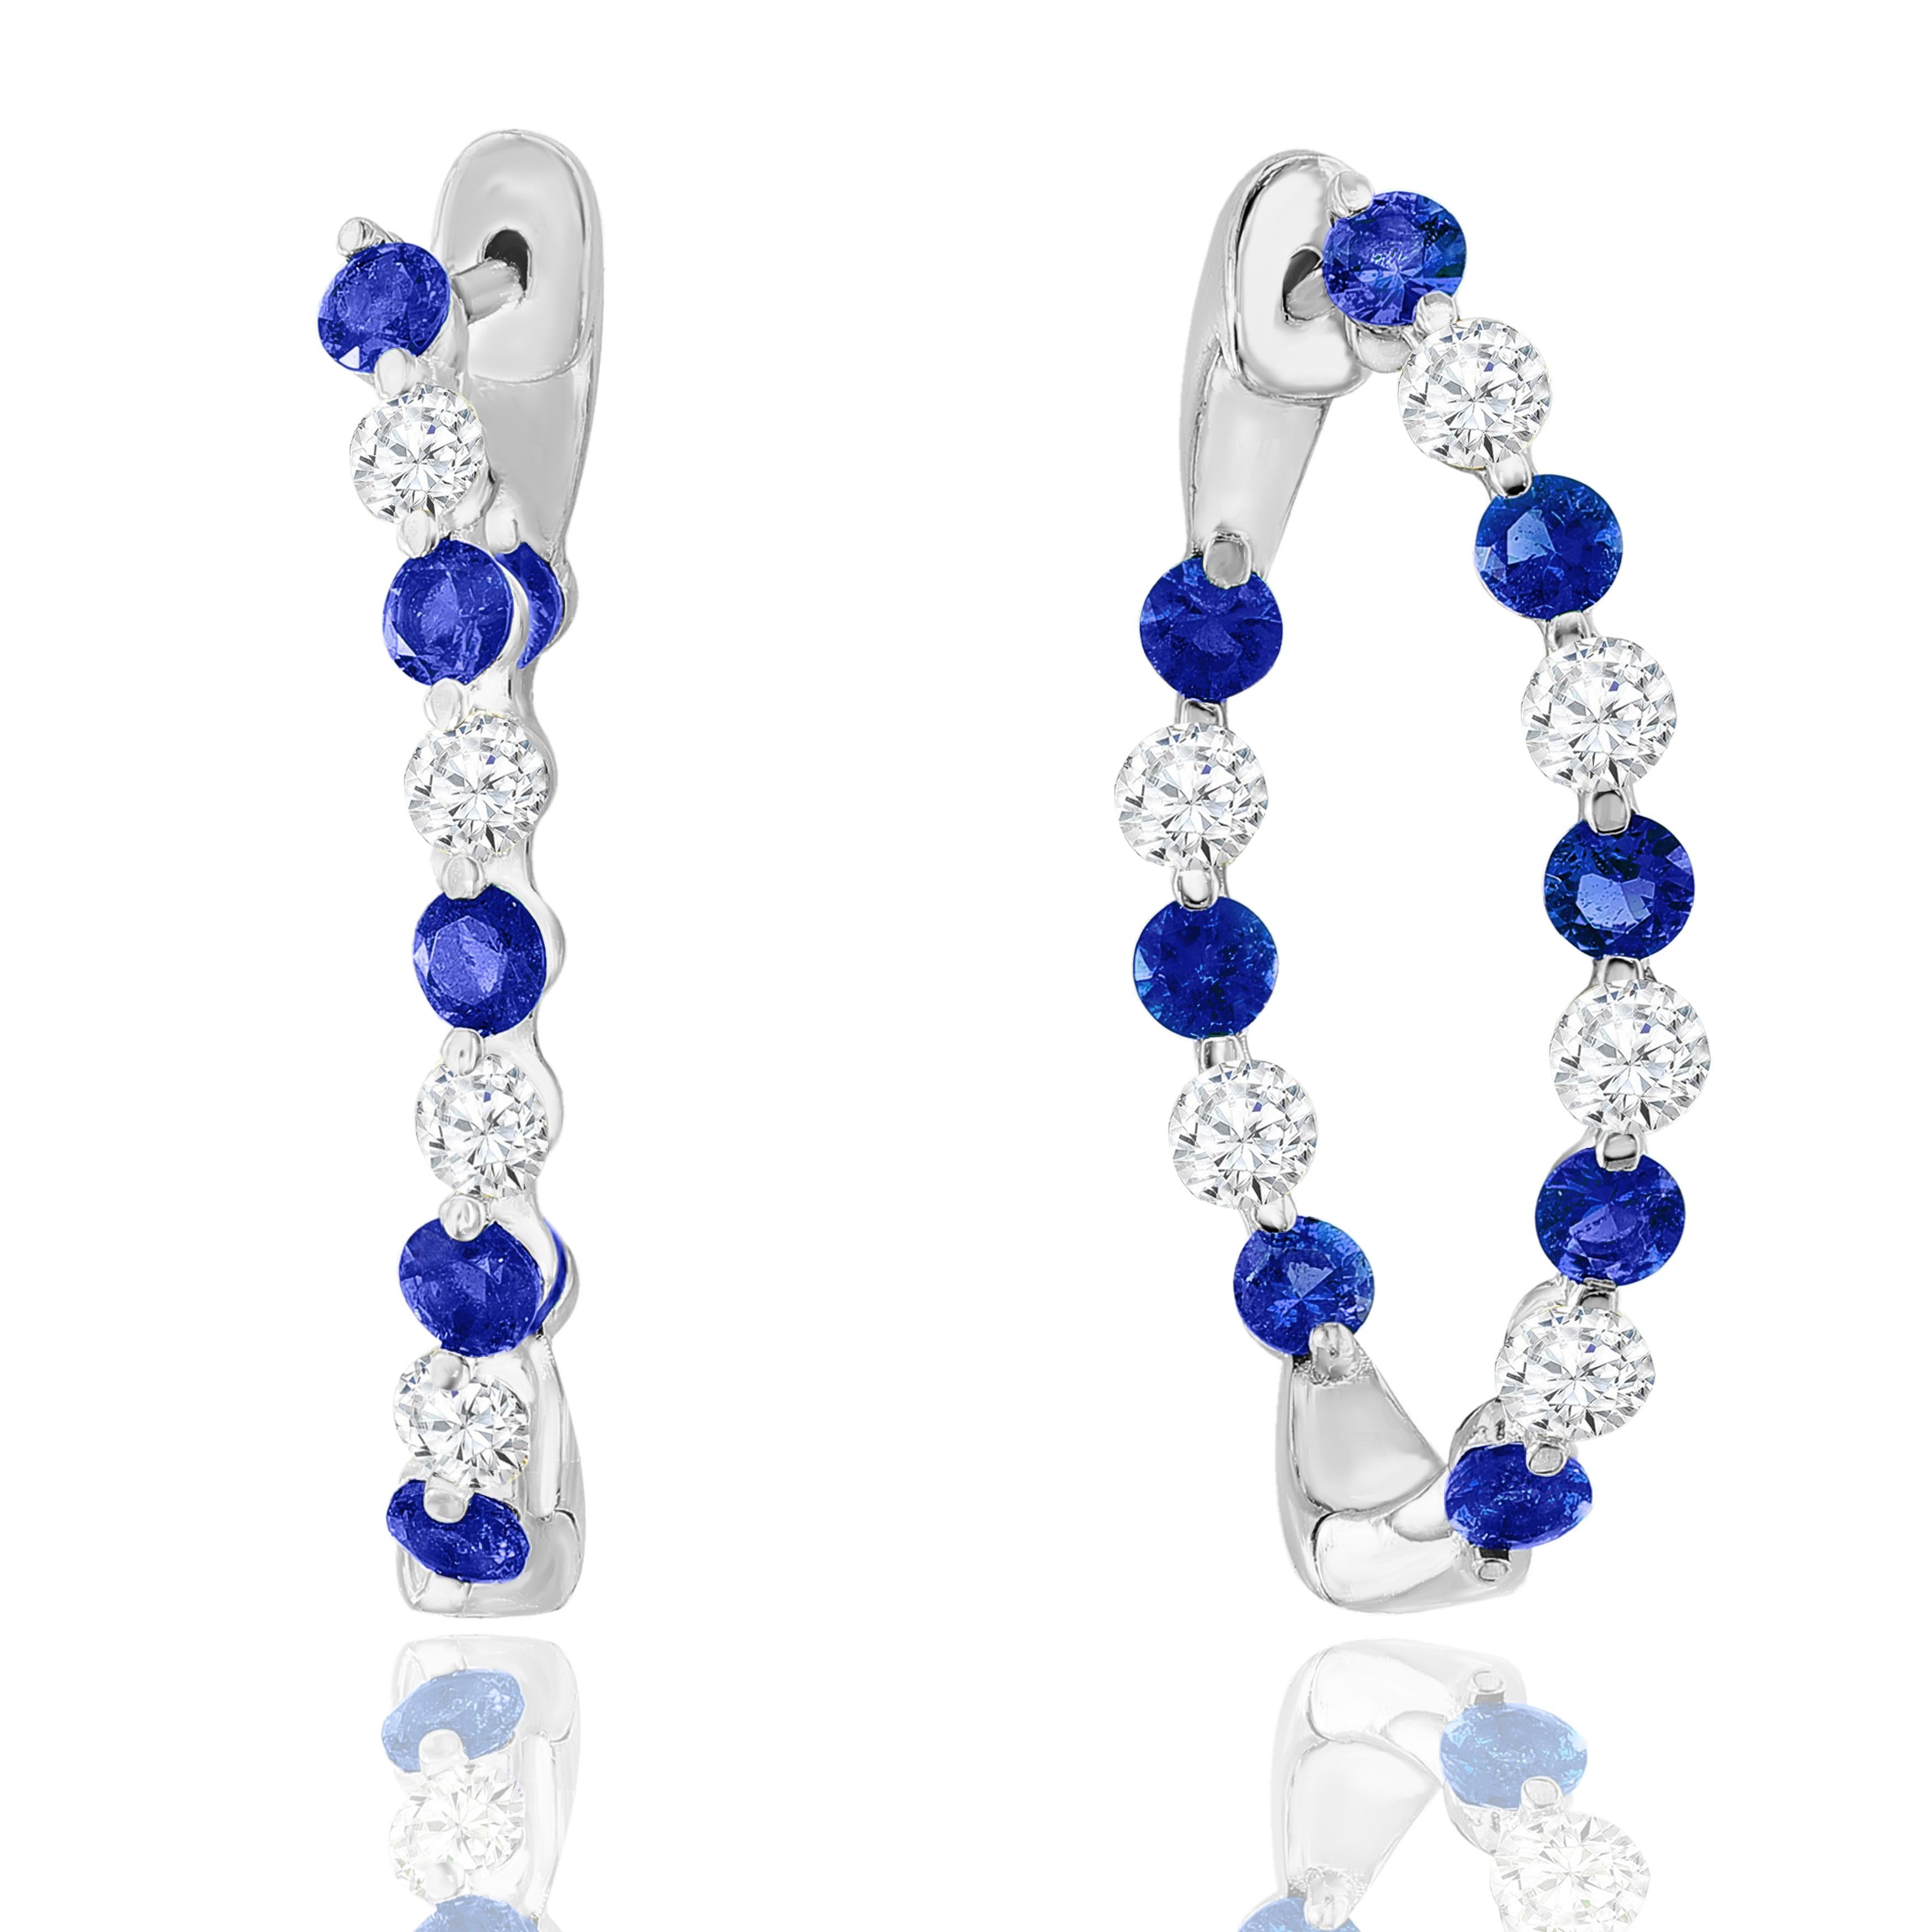 Modern 2 Carat Round Cut Blue Sapphire and Diamond Hoop Earrings in 14K White Gold For Sale